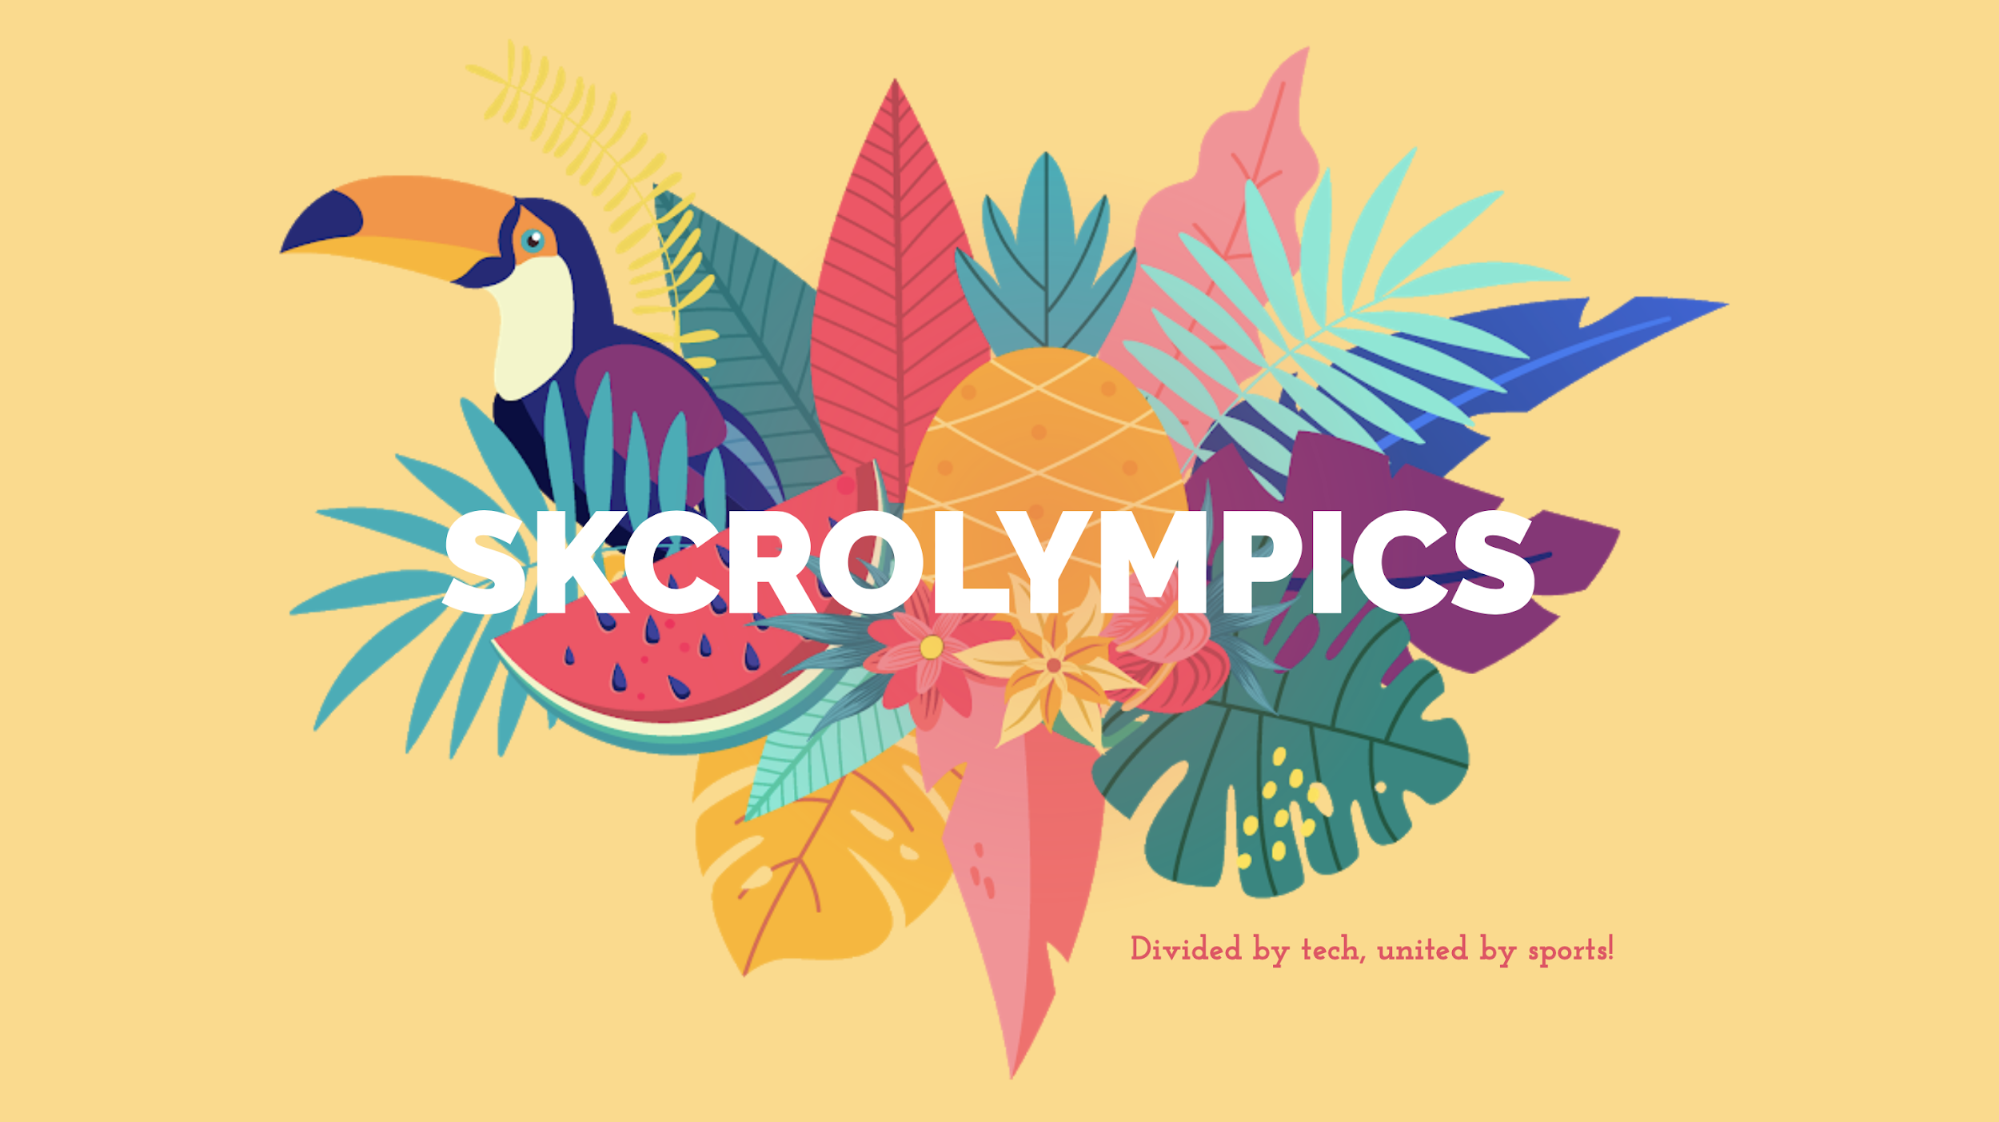 Bored at work? Try Skcrolympics!